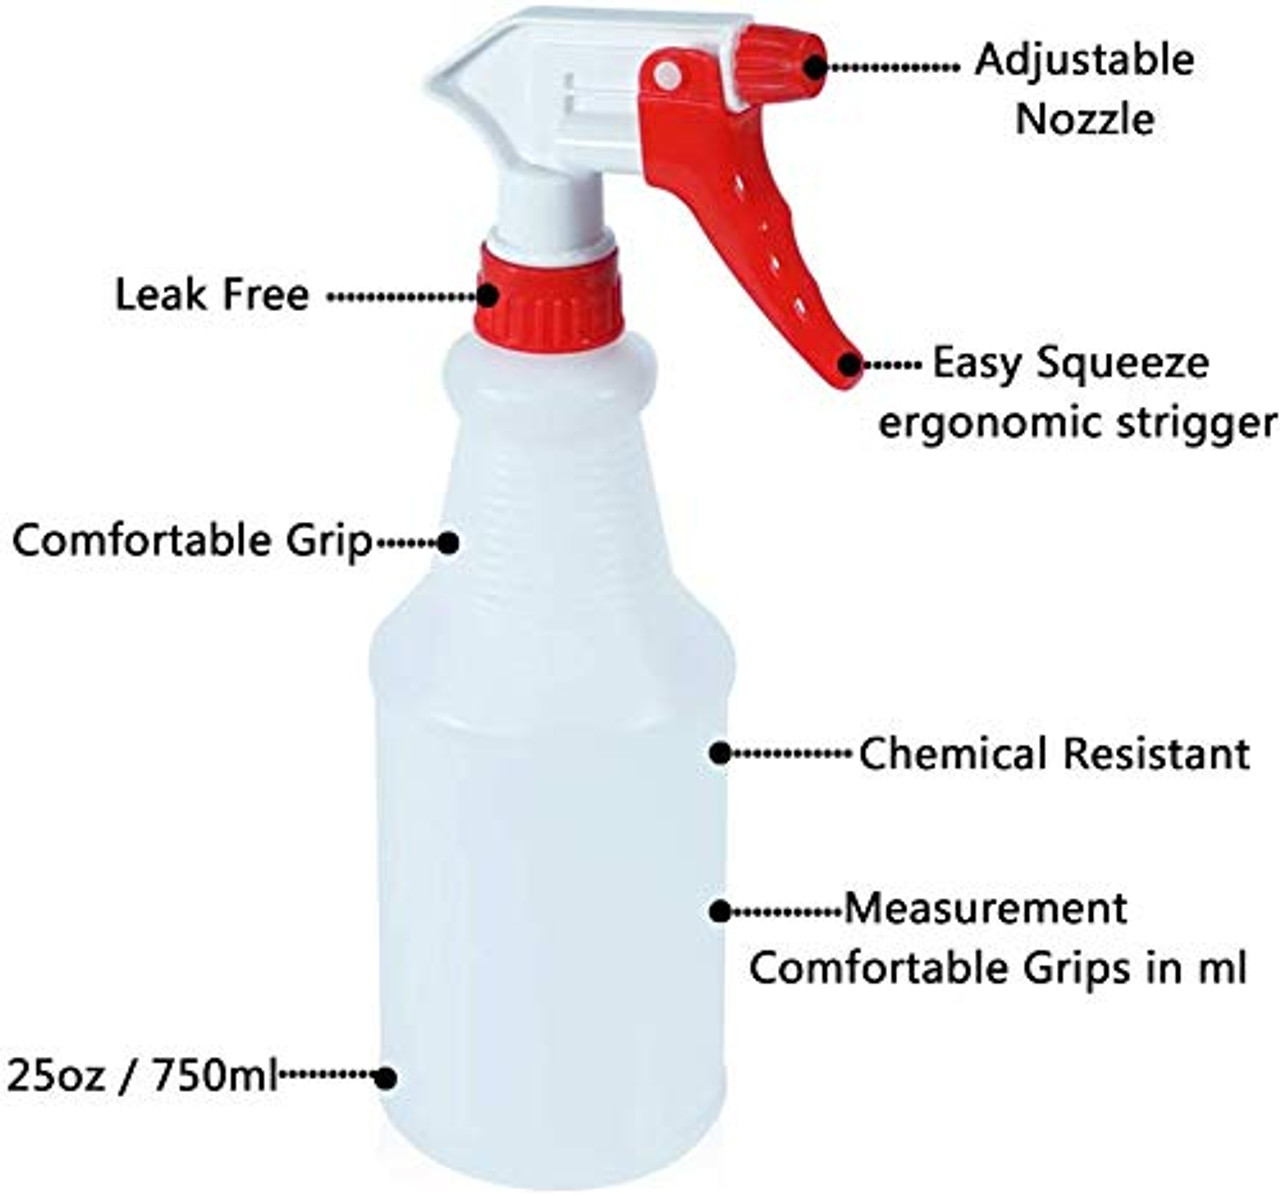 Cosywell Plastic Spray Bottles 750 ml Heavy Duty Spraying Bottle 2 Pack  Leak Proof Mist Water Bottle for Chemical and Cleaning Solutions  All-Purpose